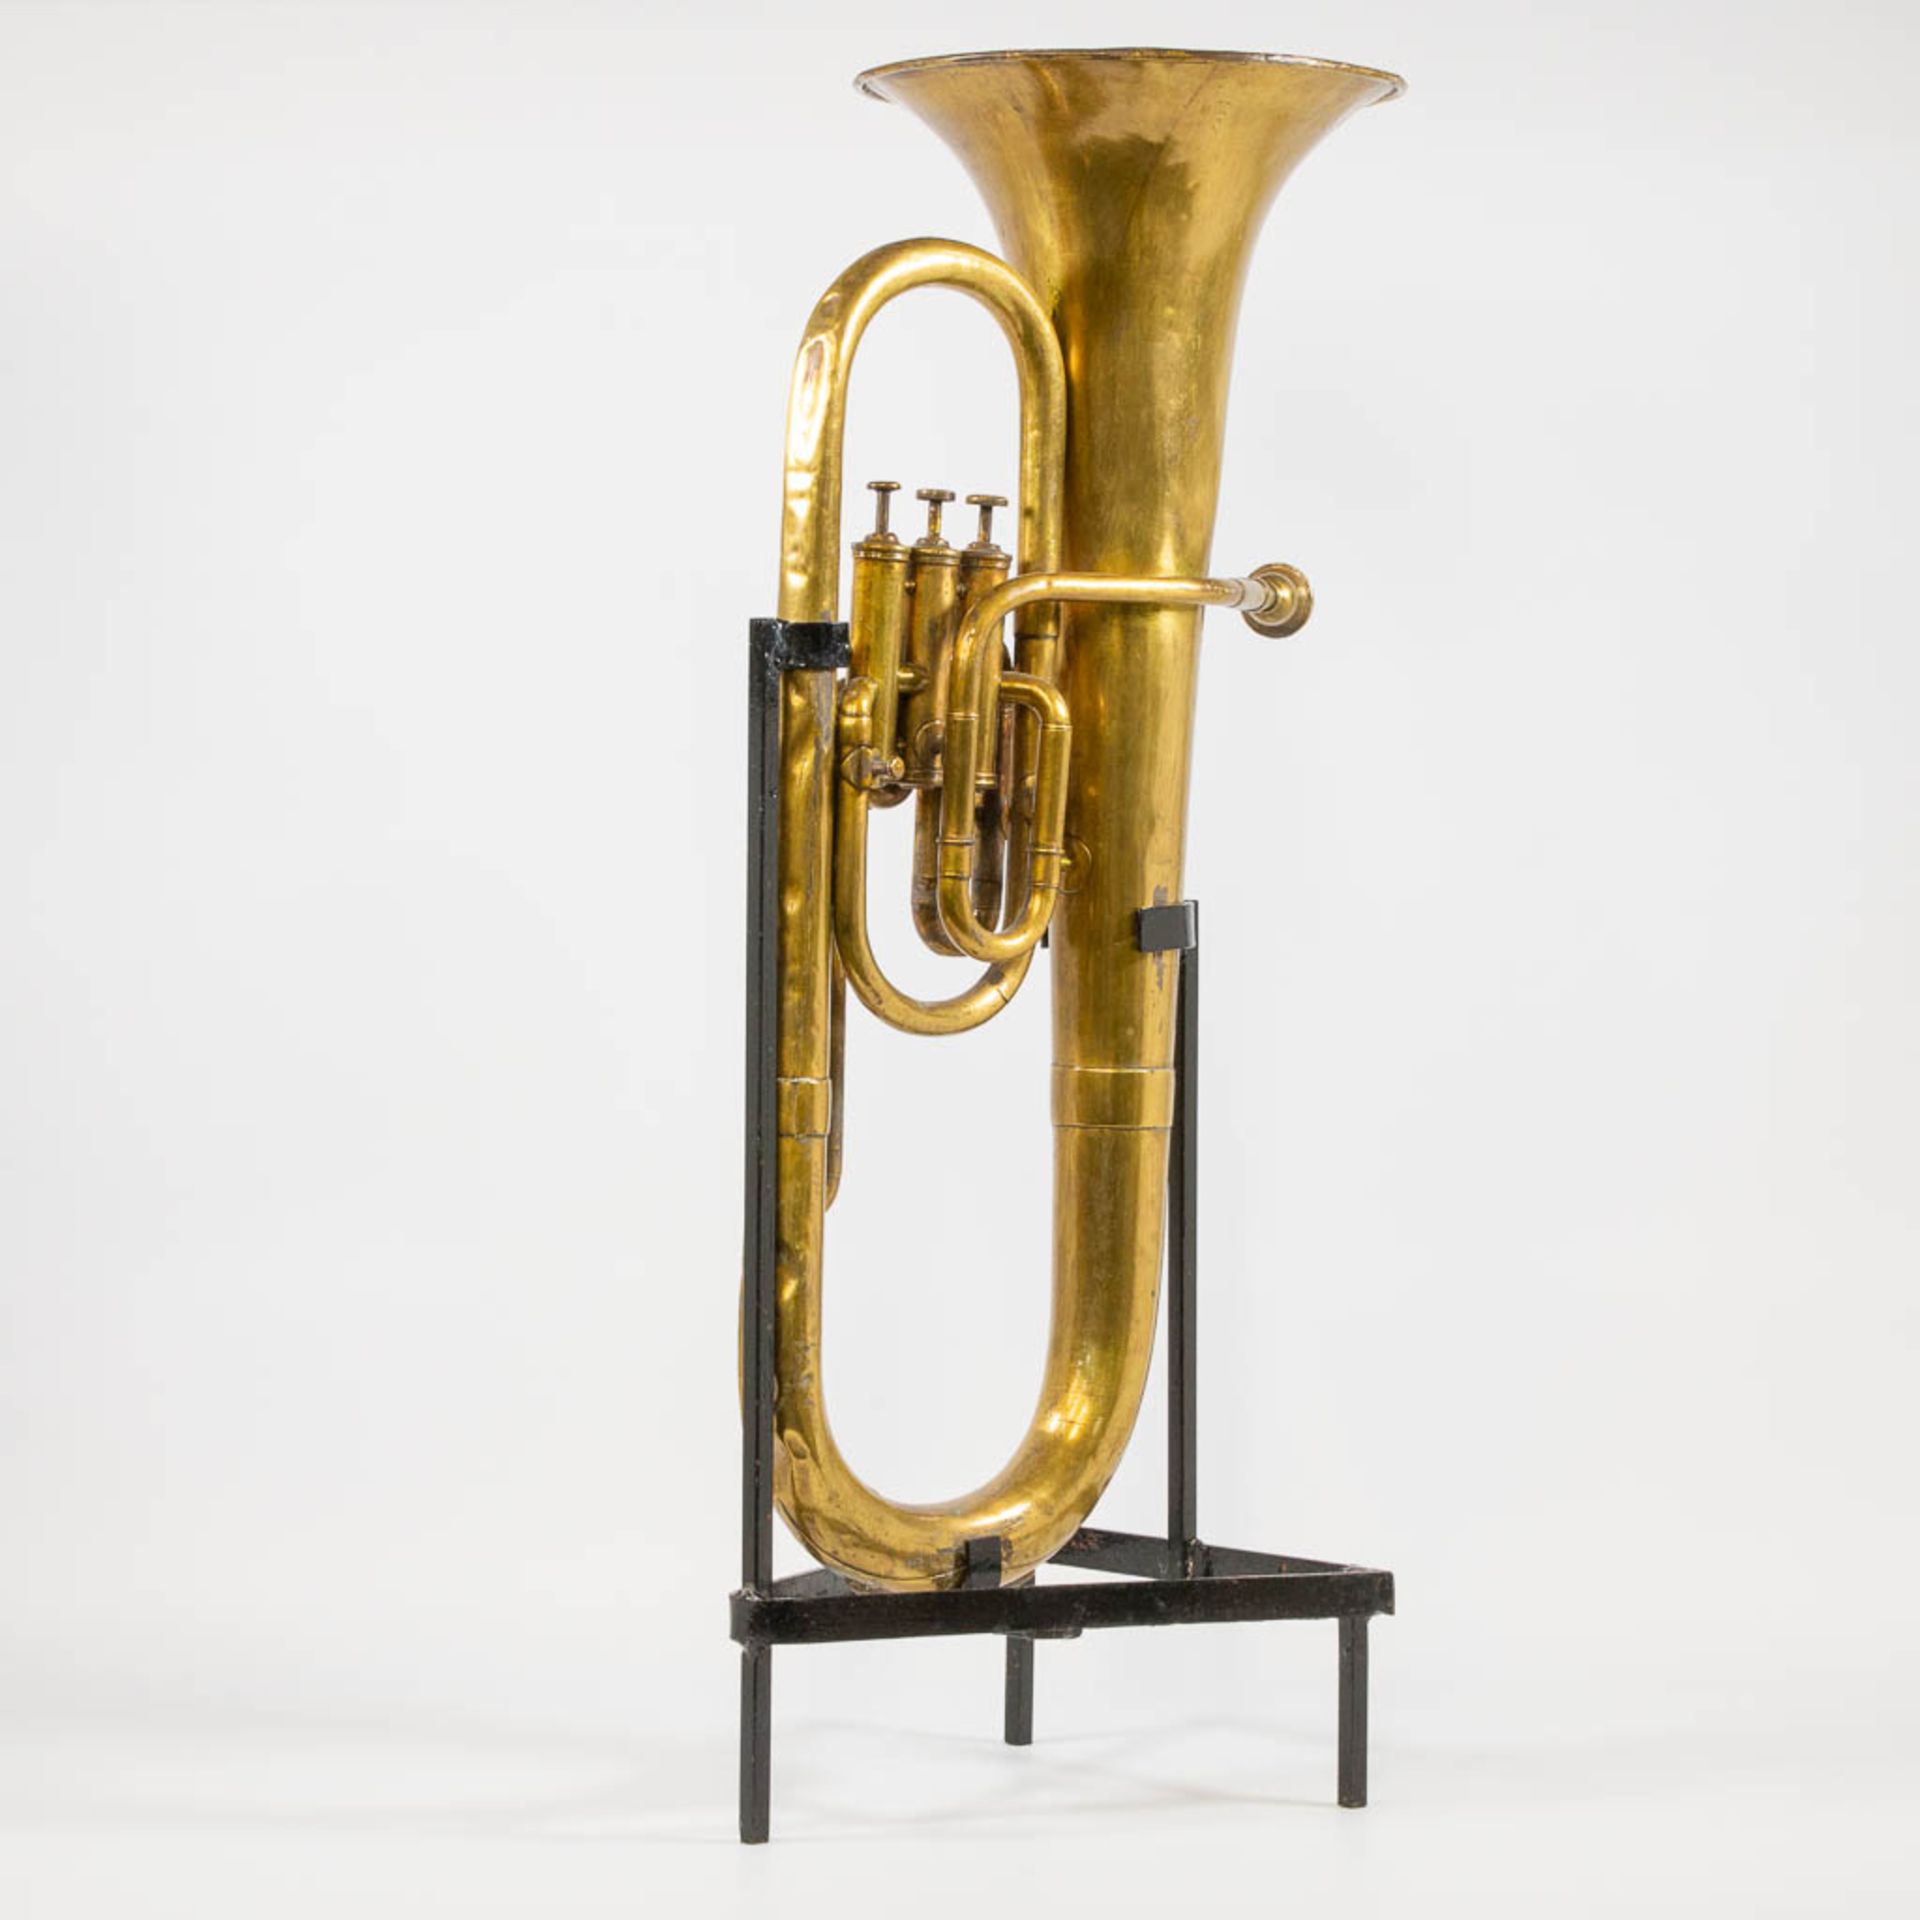 A Copper Tenor Horn, made in Brussels by J. Persy.